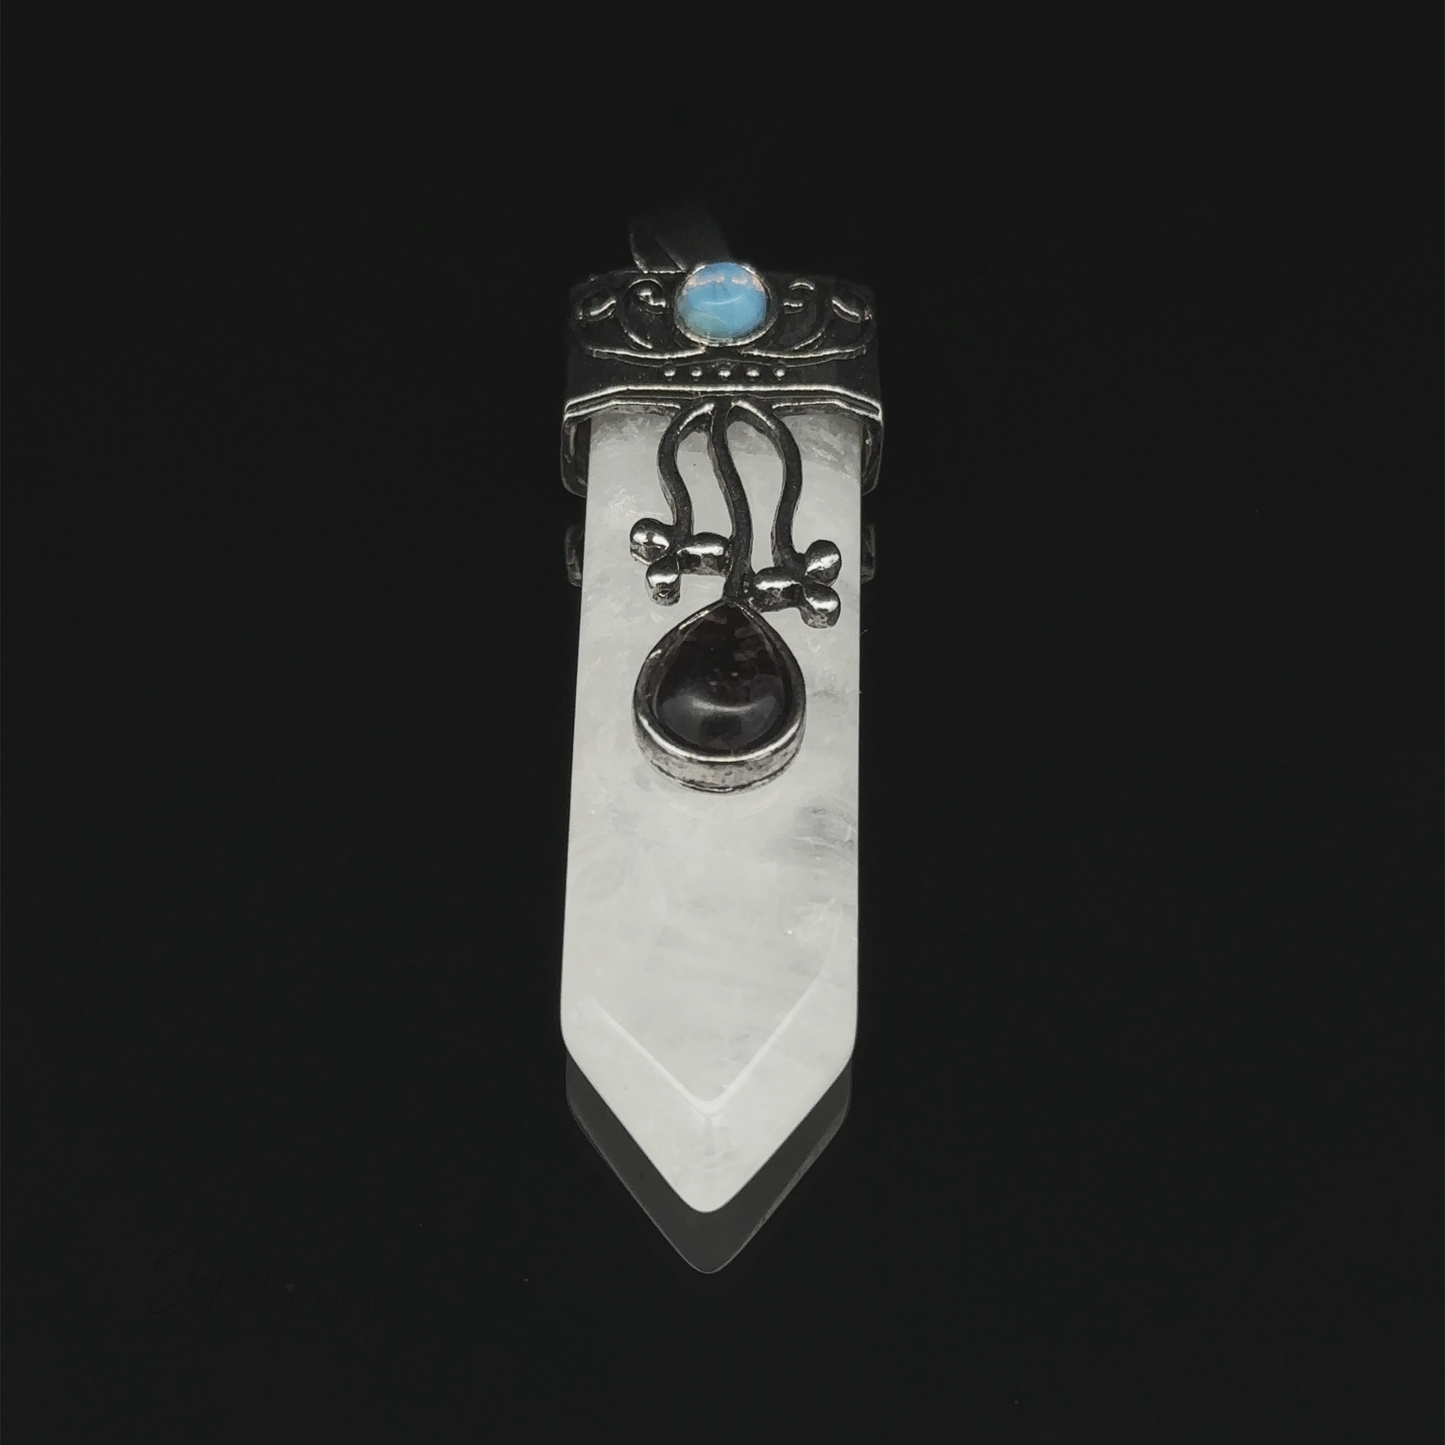 
                  
                    An Obelisk Crystal Stone Pendant with a silver design, featuring a pointed clear quartz and a black gemstone in the center. An opalite gemstone graces the top, all set against a black background.
                  
                